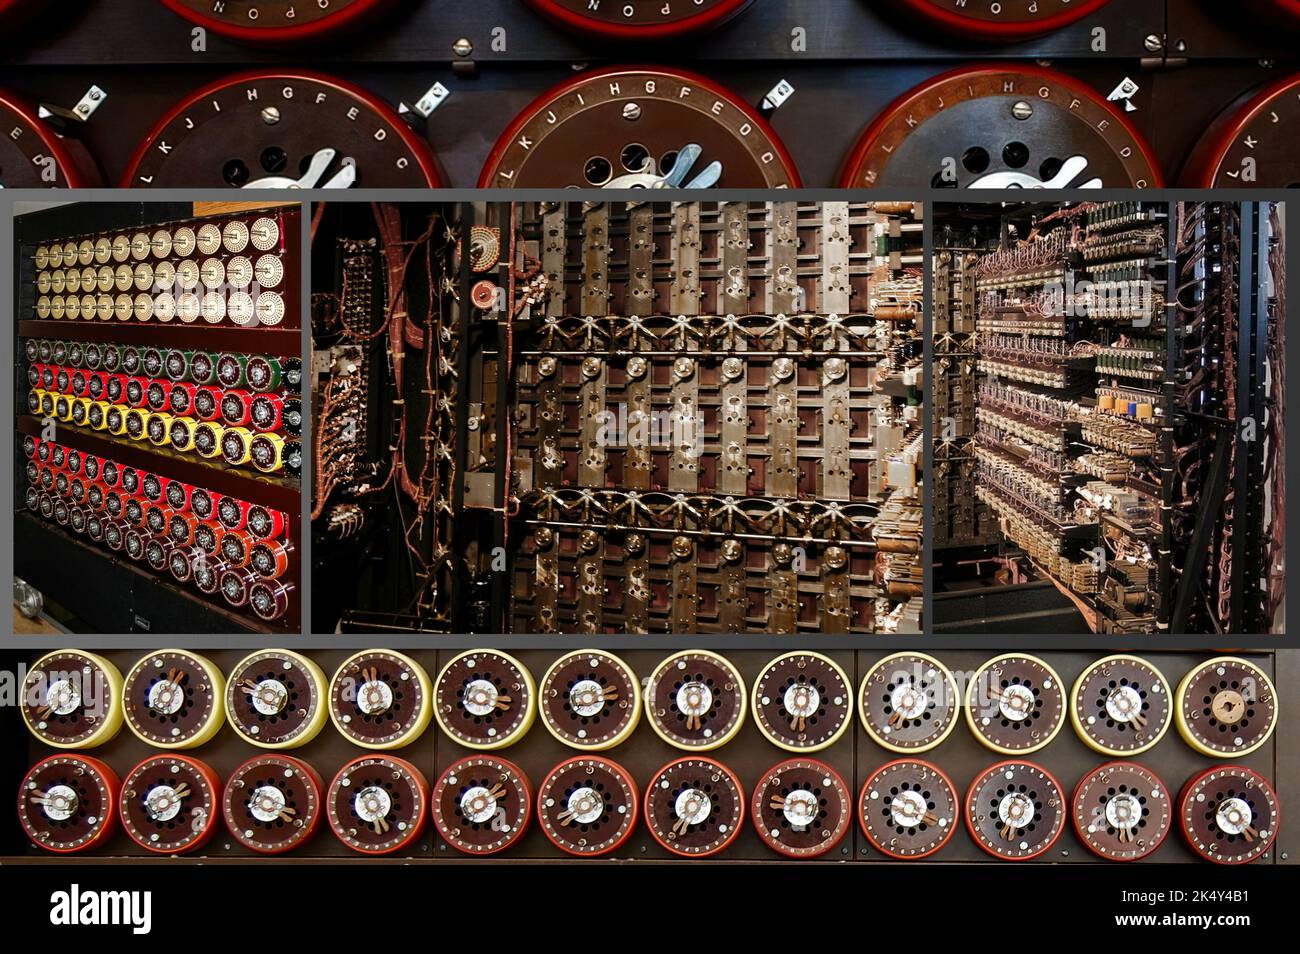 The Turing Bomb was a special calculating machine used to decipher German secret messages encoded with the Enigma machine. Stock Photo